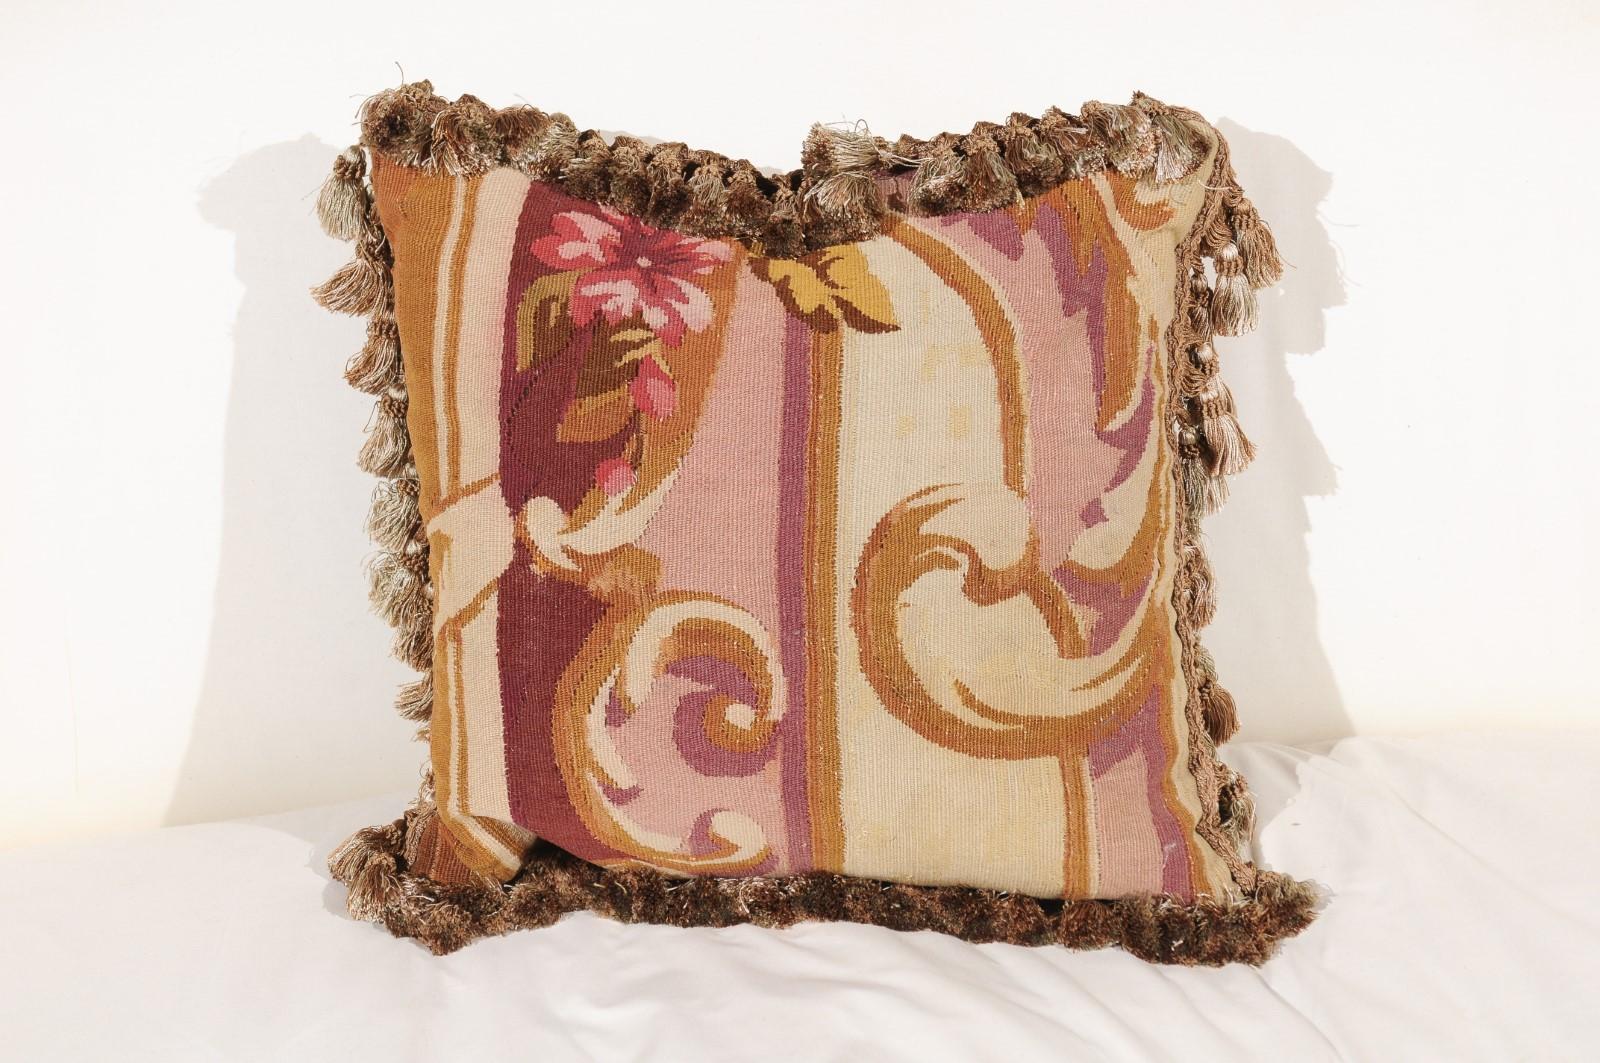 A French Aubusson tapestry pillow from the 19th century, with floral décor and scrolling foliage. Born during the 19th century in the Aubusson tapestry manufacture located in central France, this pillow features eye-catching volutes separated from